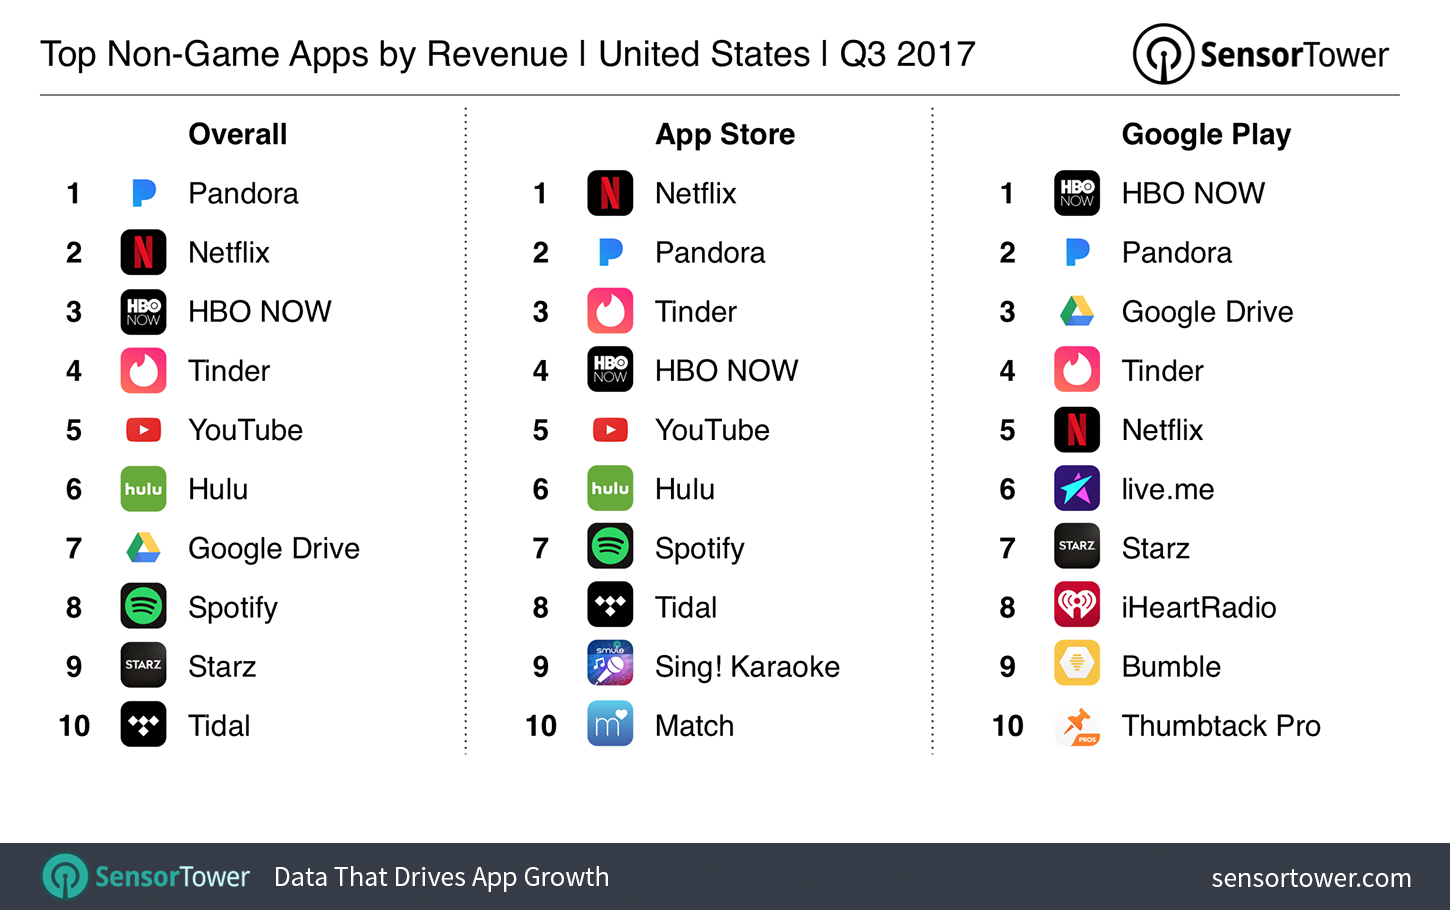 Q3 2017's Top Mobile Apps by United States Revenue